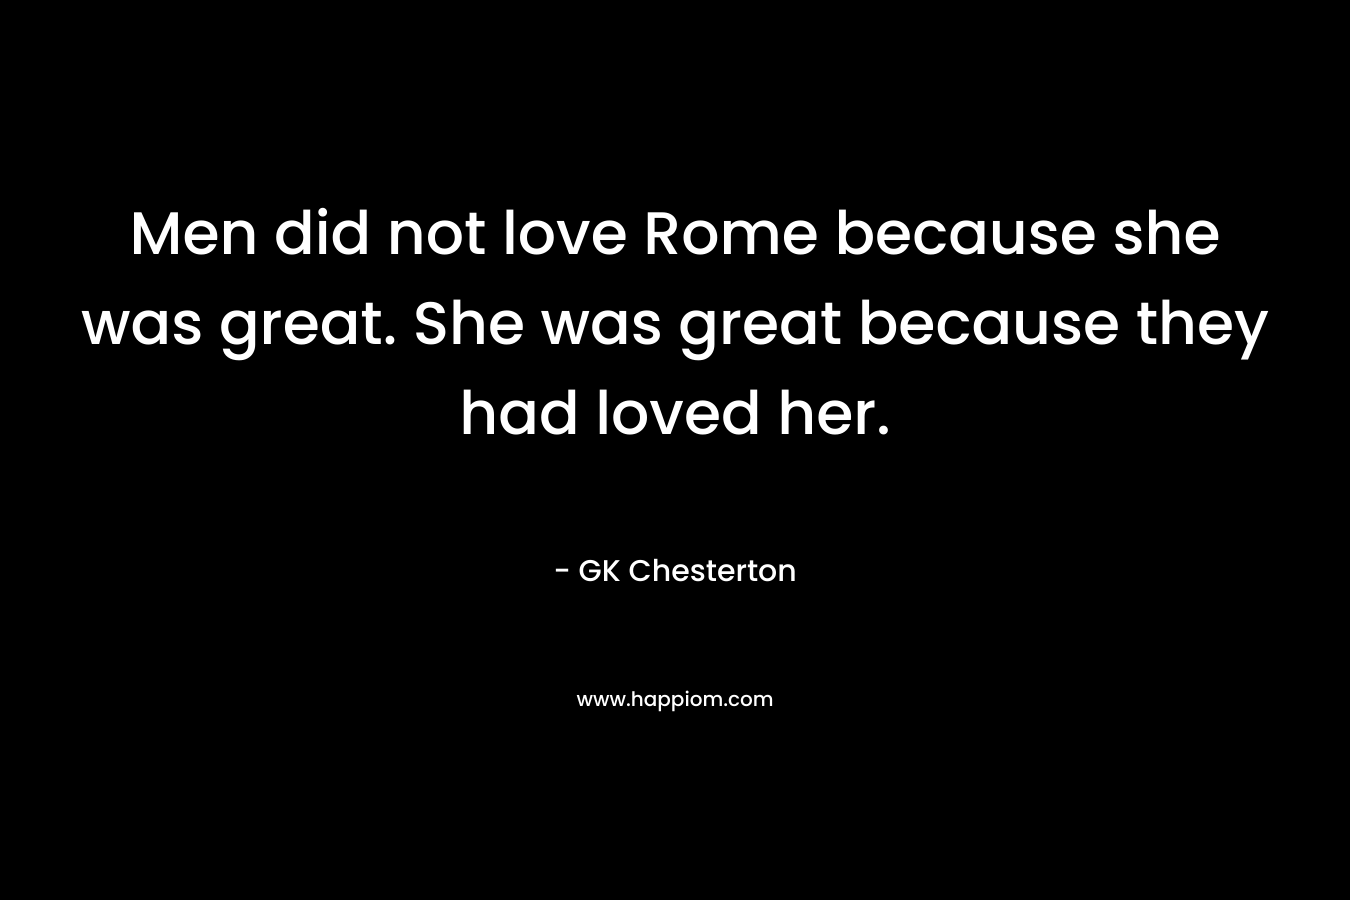 Men did not love Rome because she was great. She was great because they had loved her.